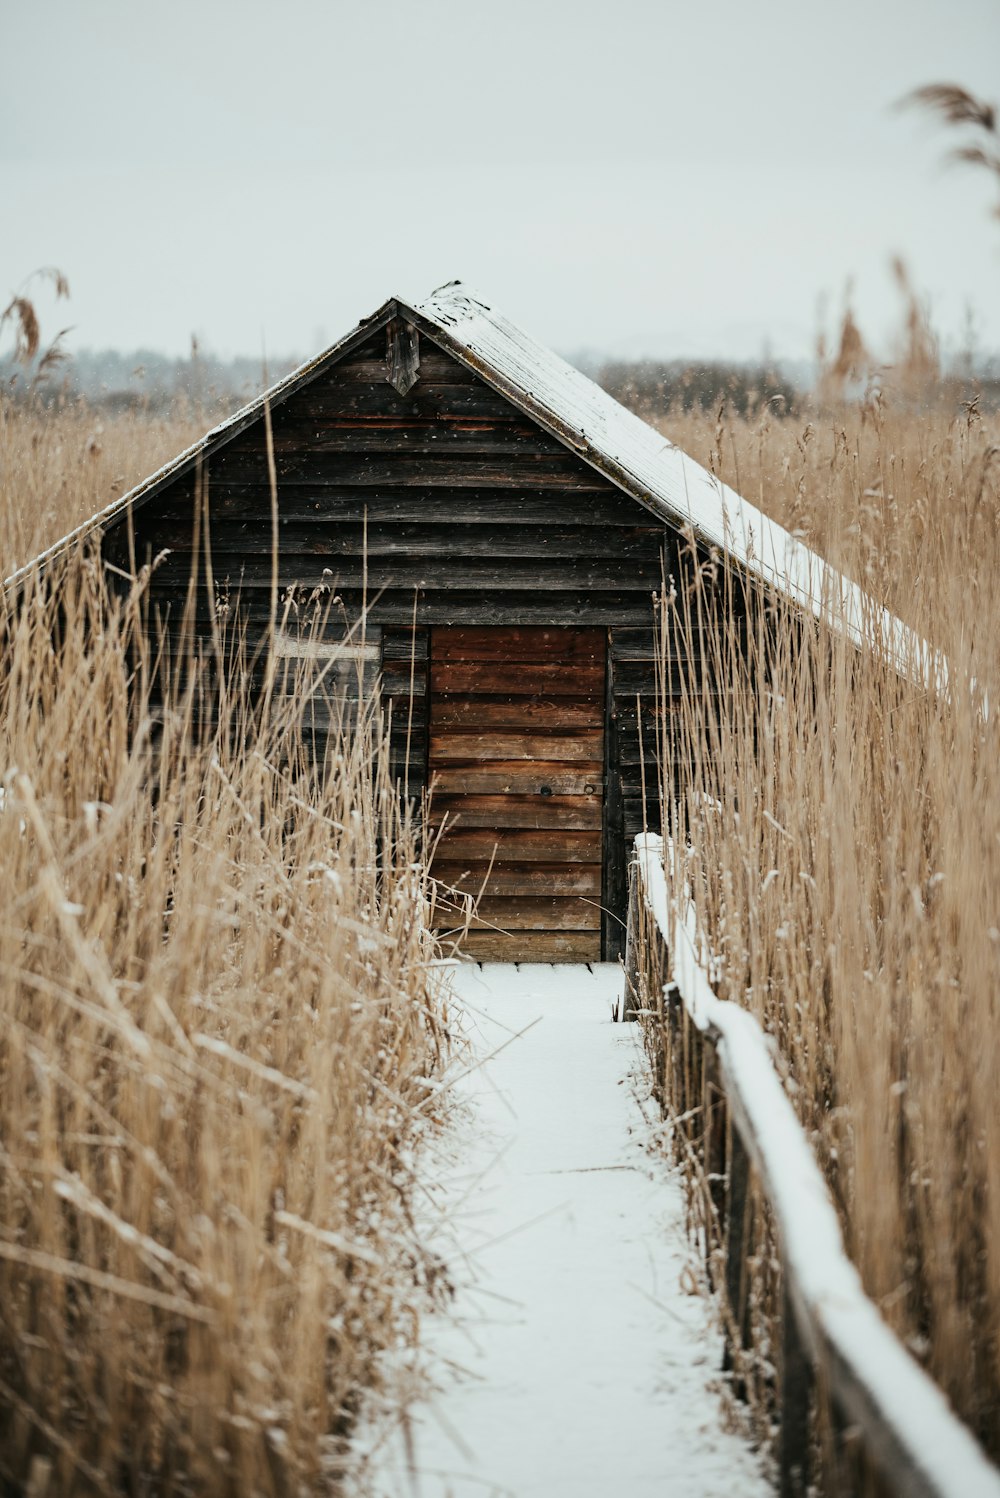 an old barn in the middle of a snowy field